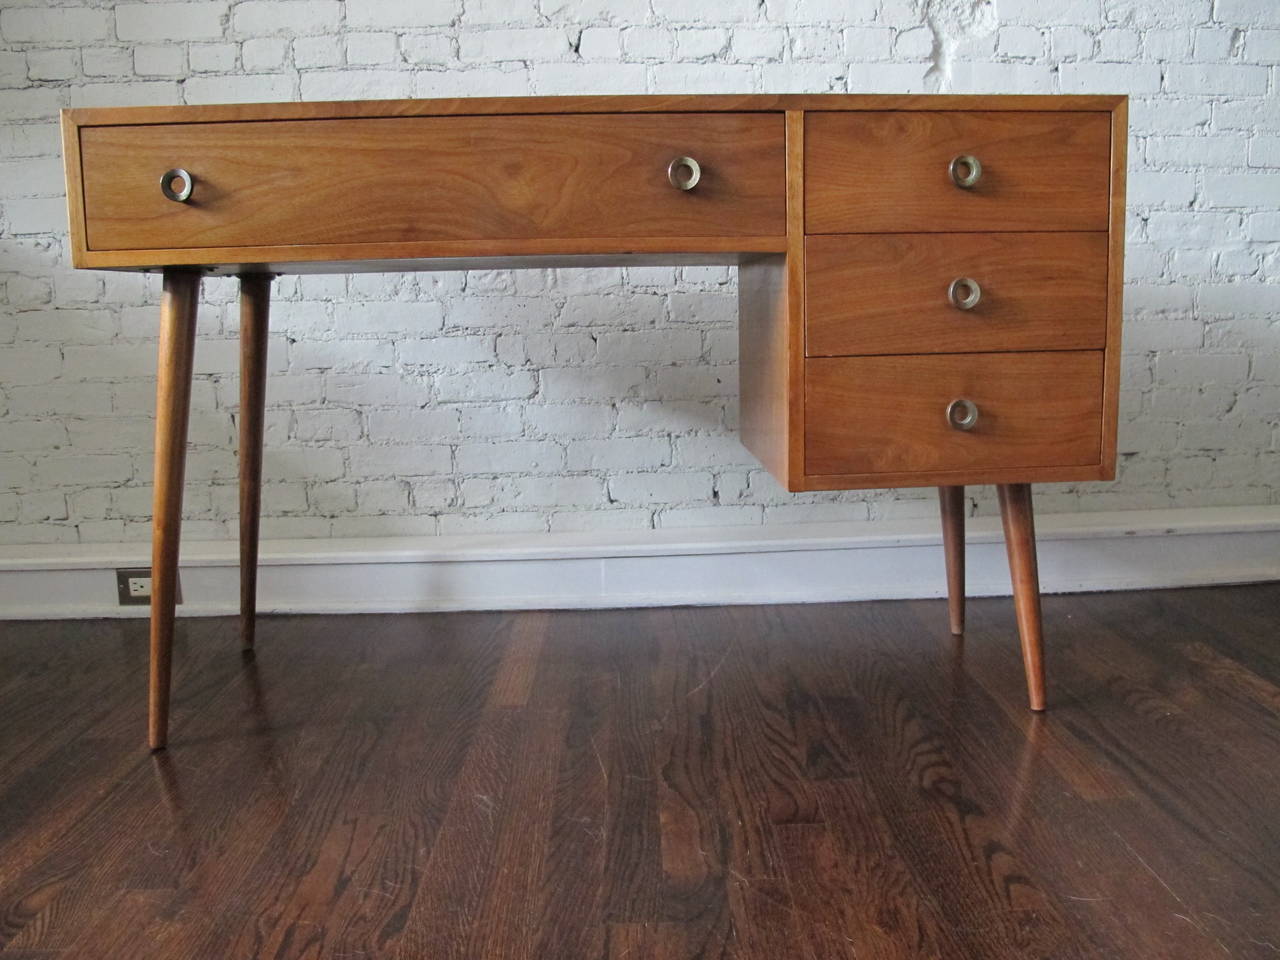 Small writing desk or vanity in American walnut, designed by Stanley Young for Glenn of California. Features four drawers. Great original condition with some light scratches from use. Knee hole is 23